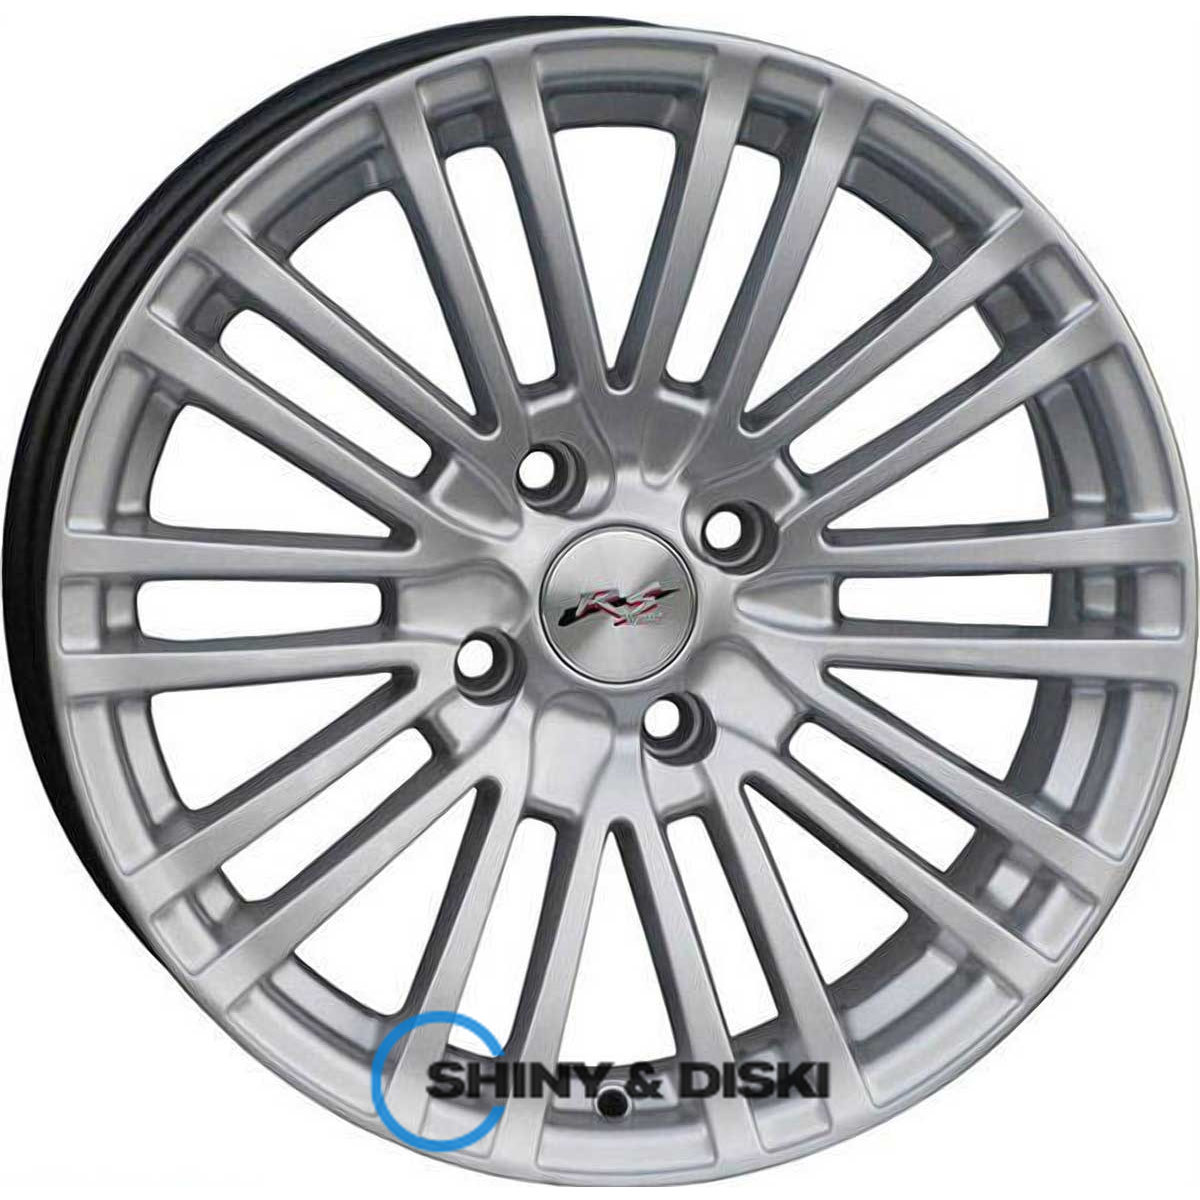 rs tuning 238 hs r17 w7 pcd4x108 et25 dia65.1